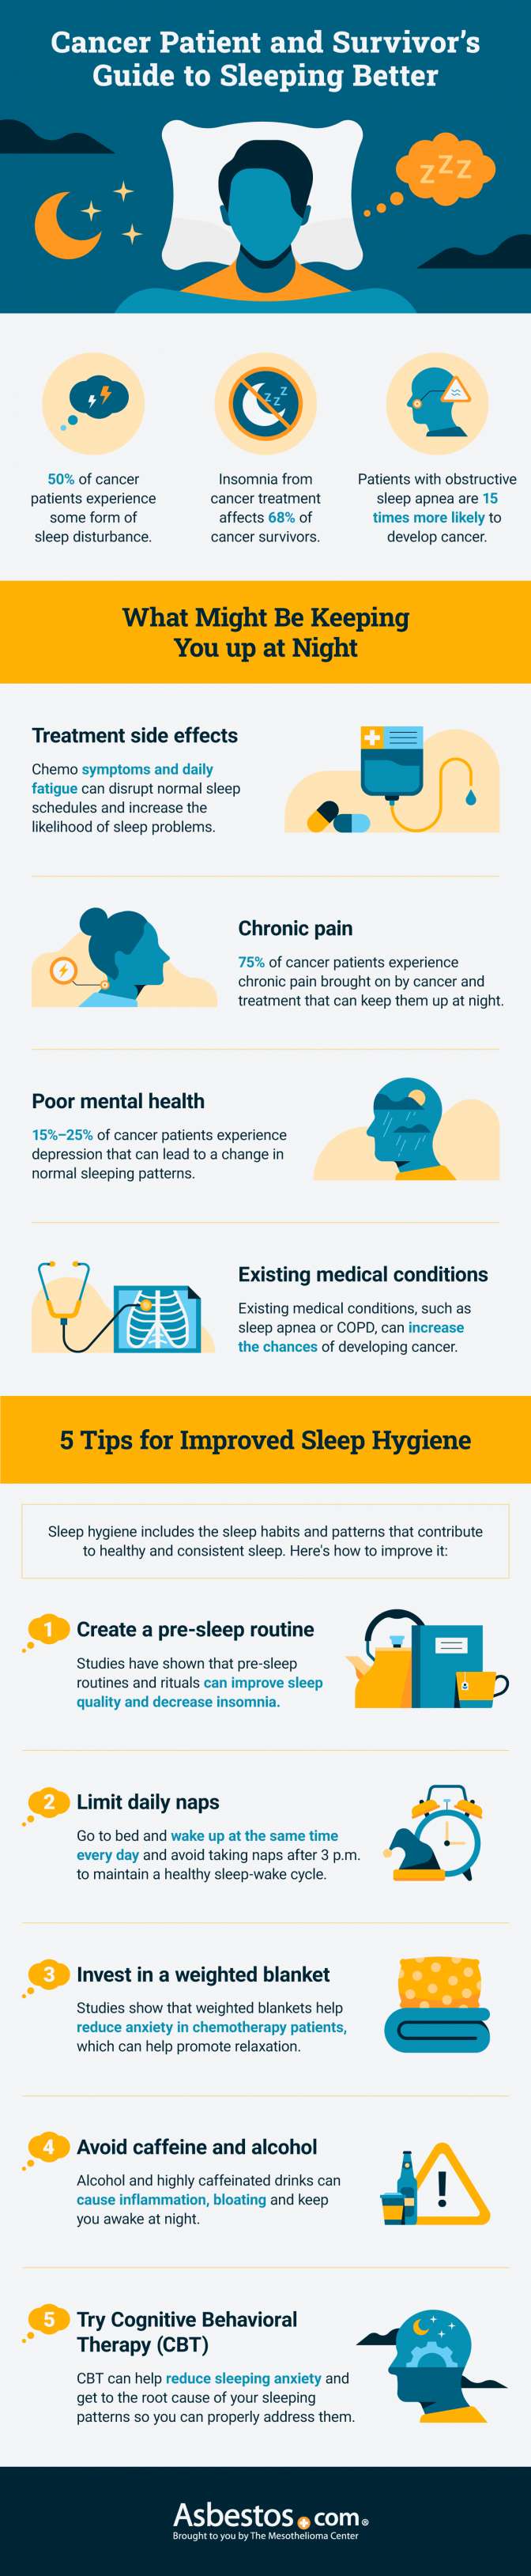 Cancer patient and survivor's guide to sleeping better